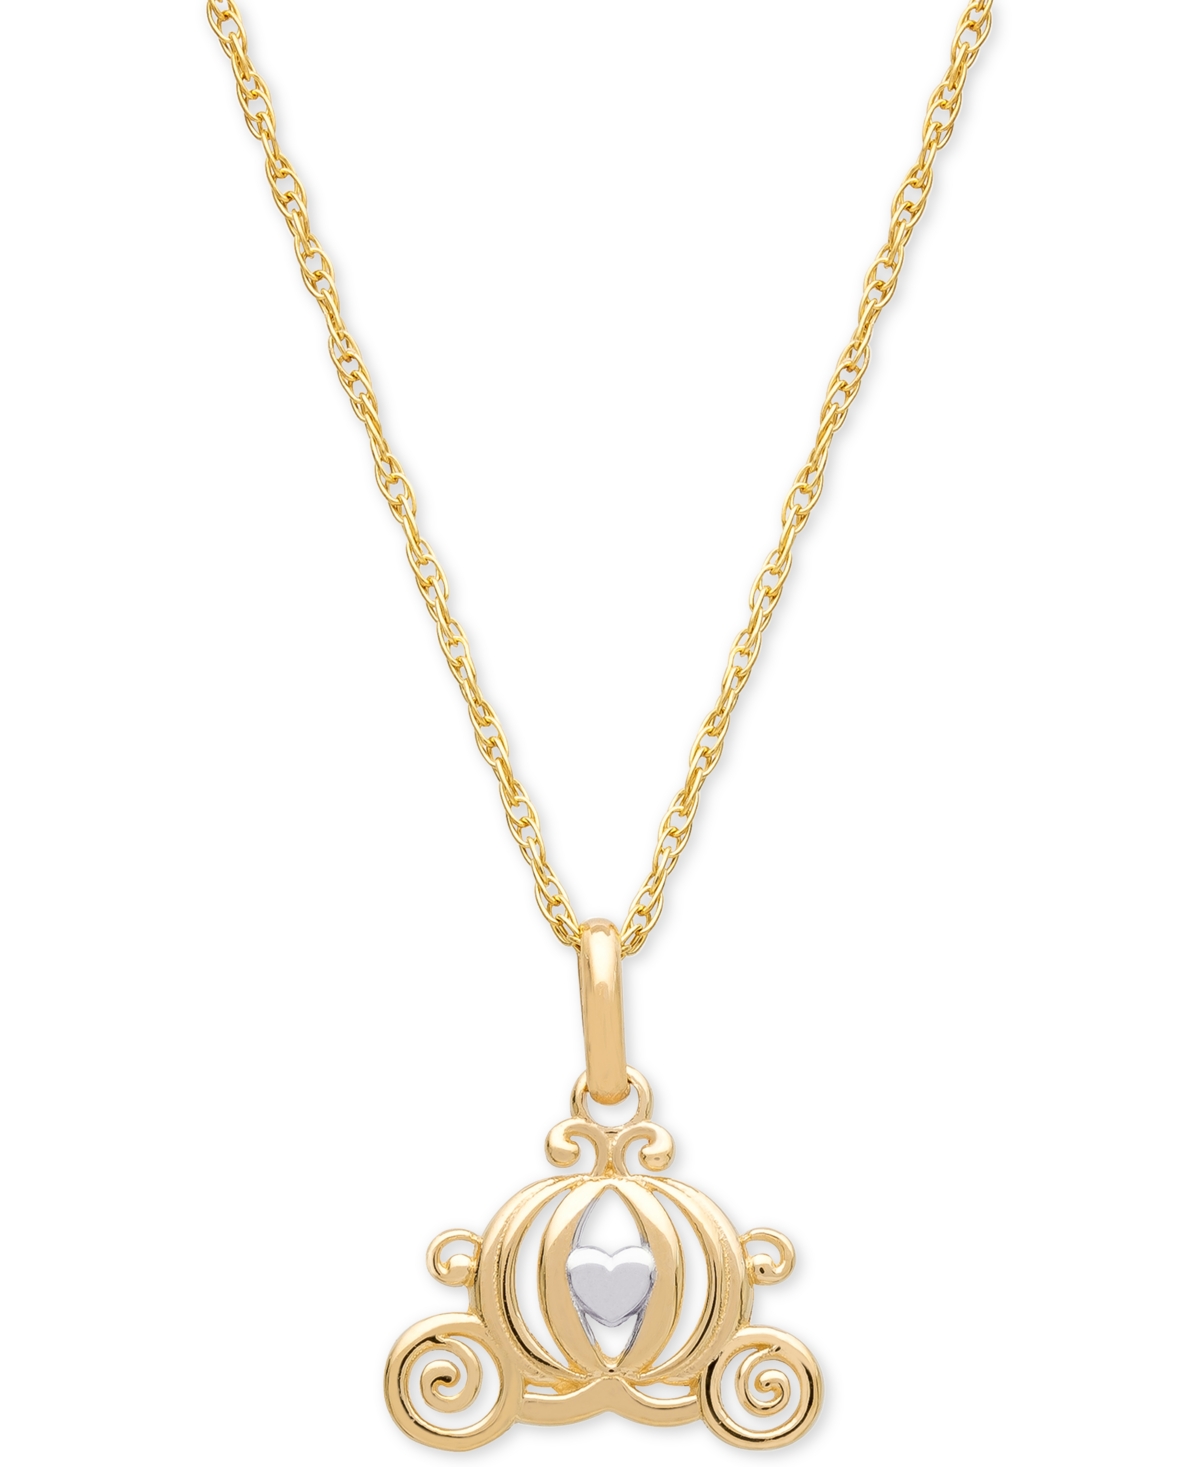 DISNEY CHILDREN'S CARRIAGE 15" PENDANT NECKLACE IN 14K GOLD